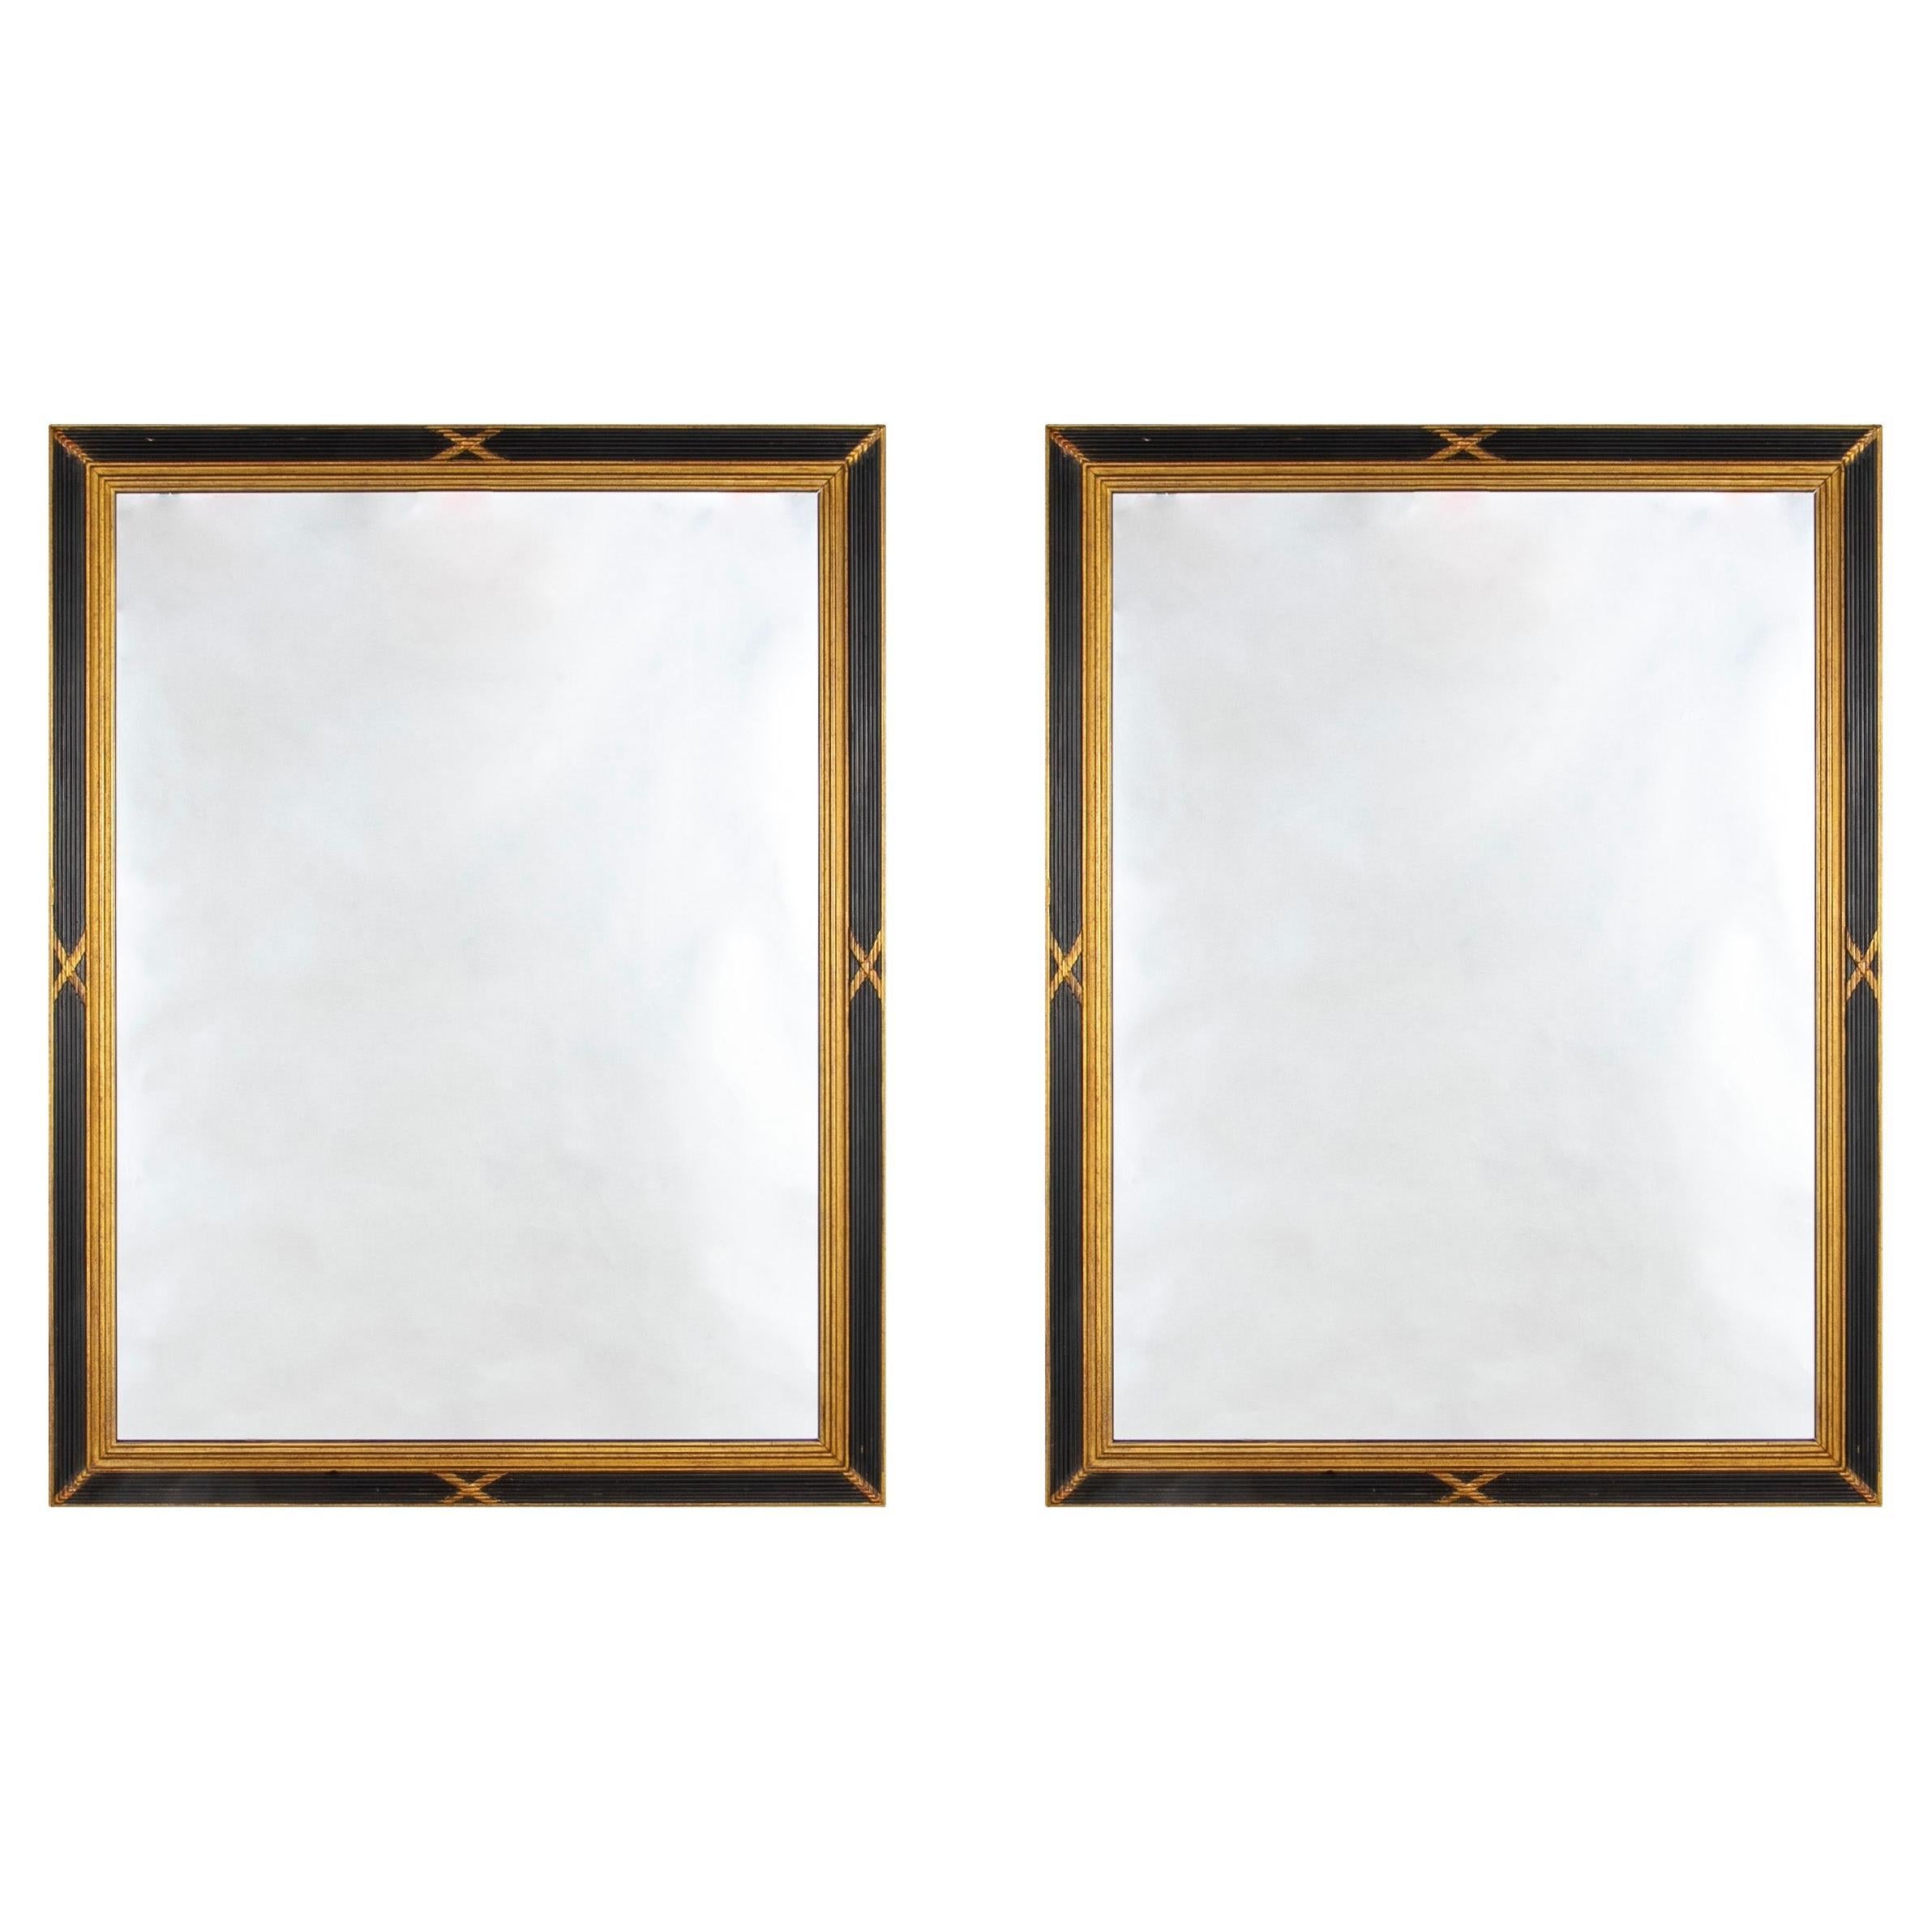 Pair Neoclassical Style Painted and Gilt Wall Mirrors, Mid 20th Century For Sale